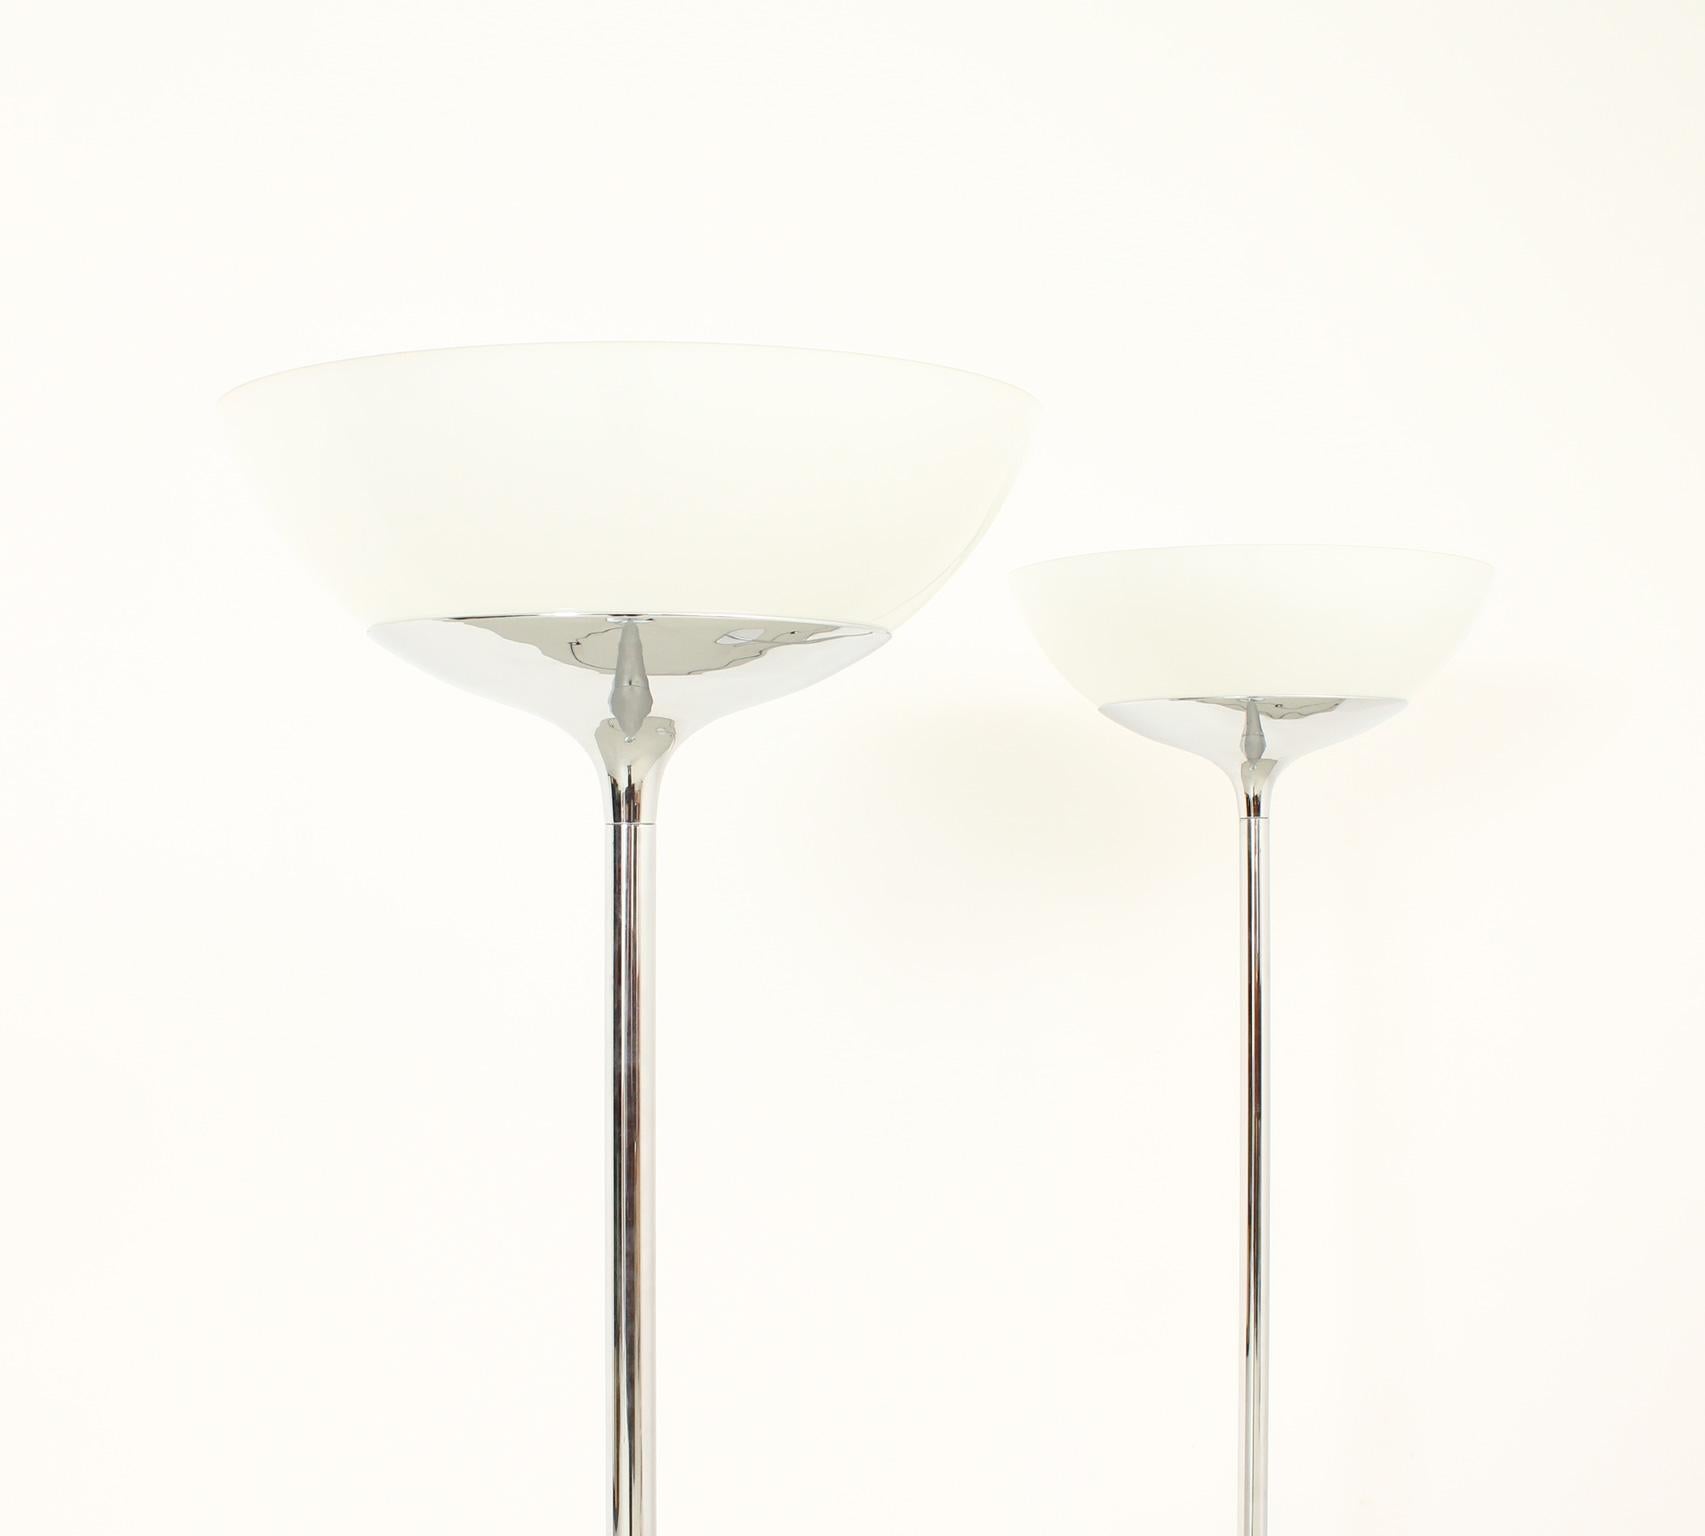 Mid-Century Modern Pair of Aminta Floor Lamps by Emma Scheinberger, Italy, 1966 For Sale